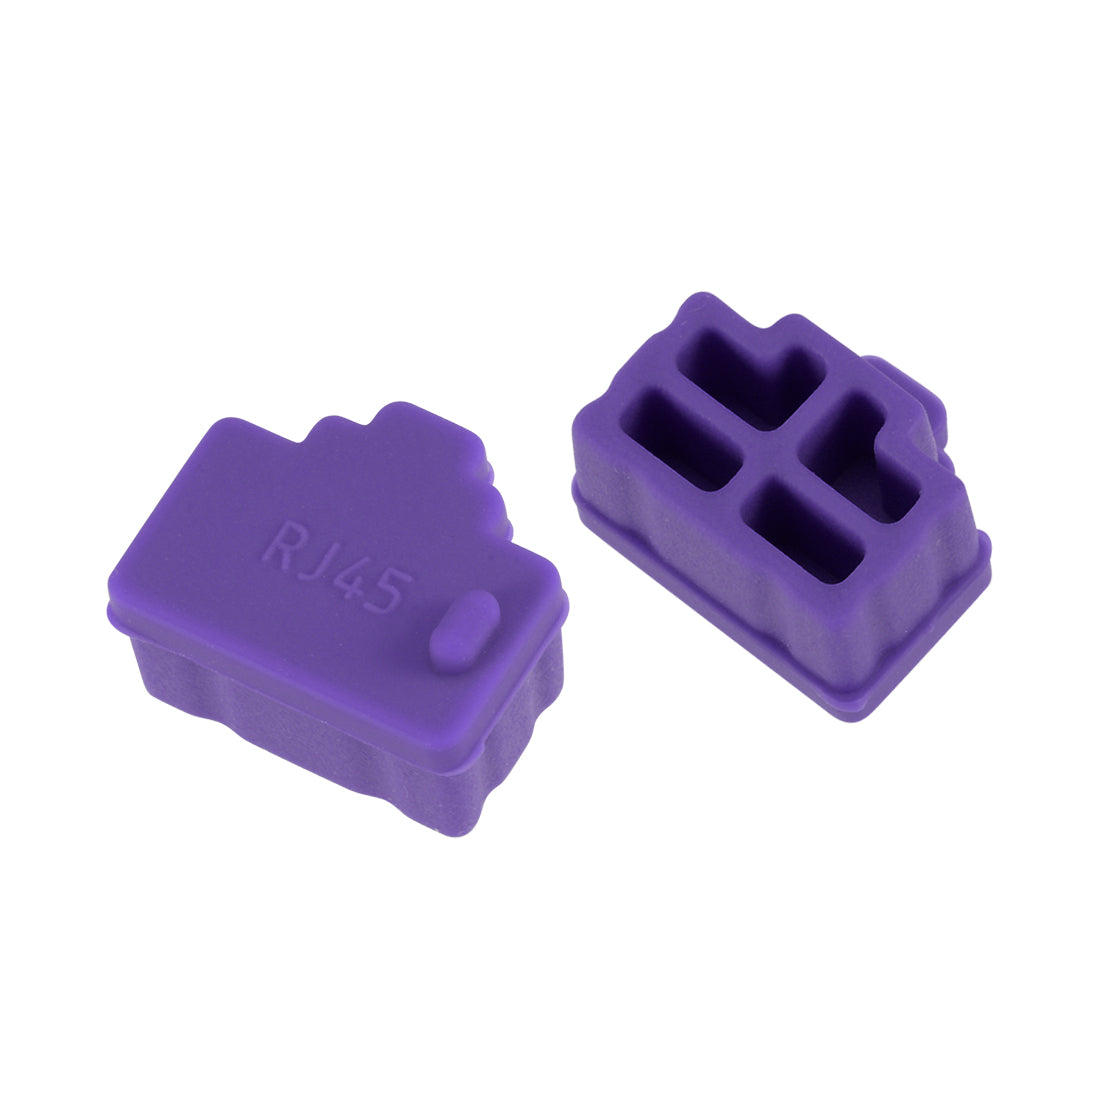 uxcell Uxcell 20pcs RJ45 Silicone Protectors Ethernet Hub Port Anti Dust Cap Cover, Purple